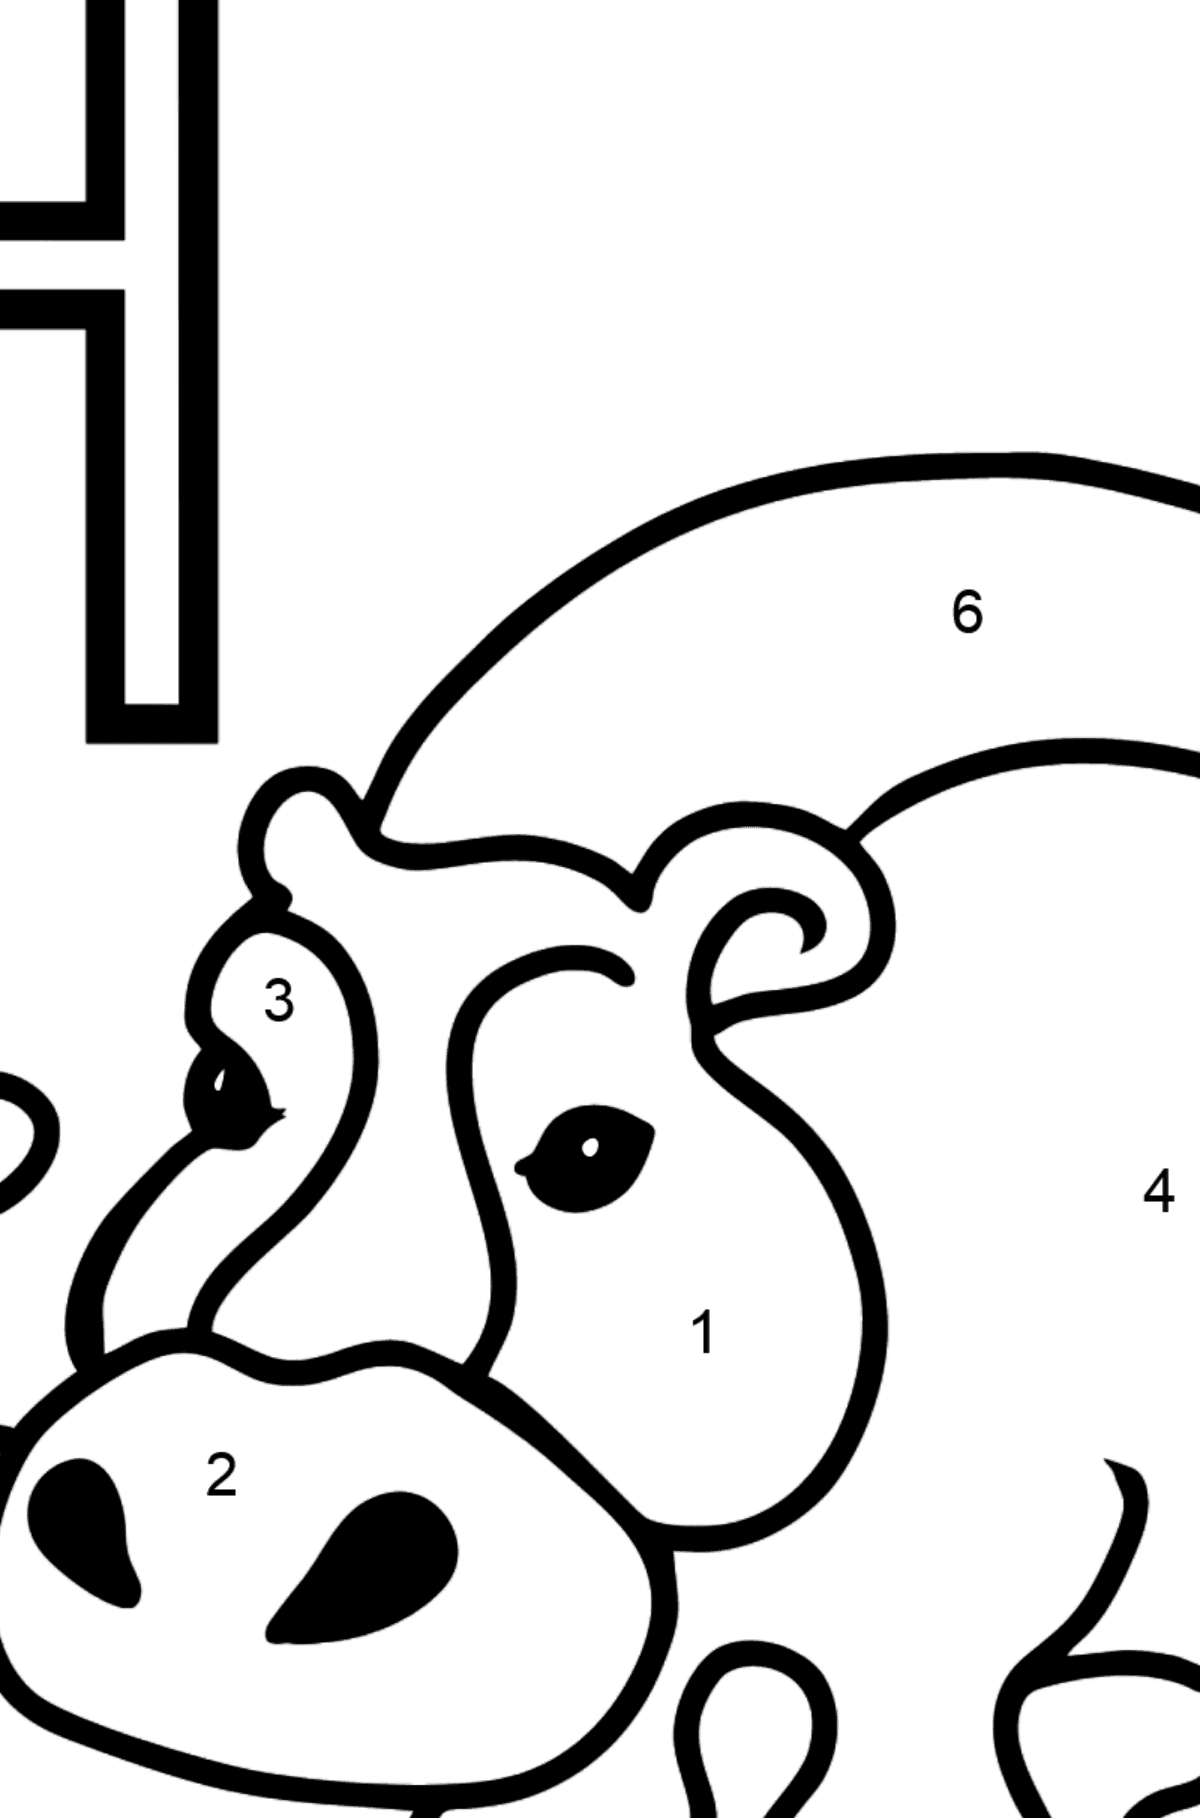 Portuguese Letter H coloring pages - HIPOPÓTAMO - Coloring by Numbers for Kids